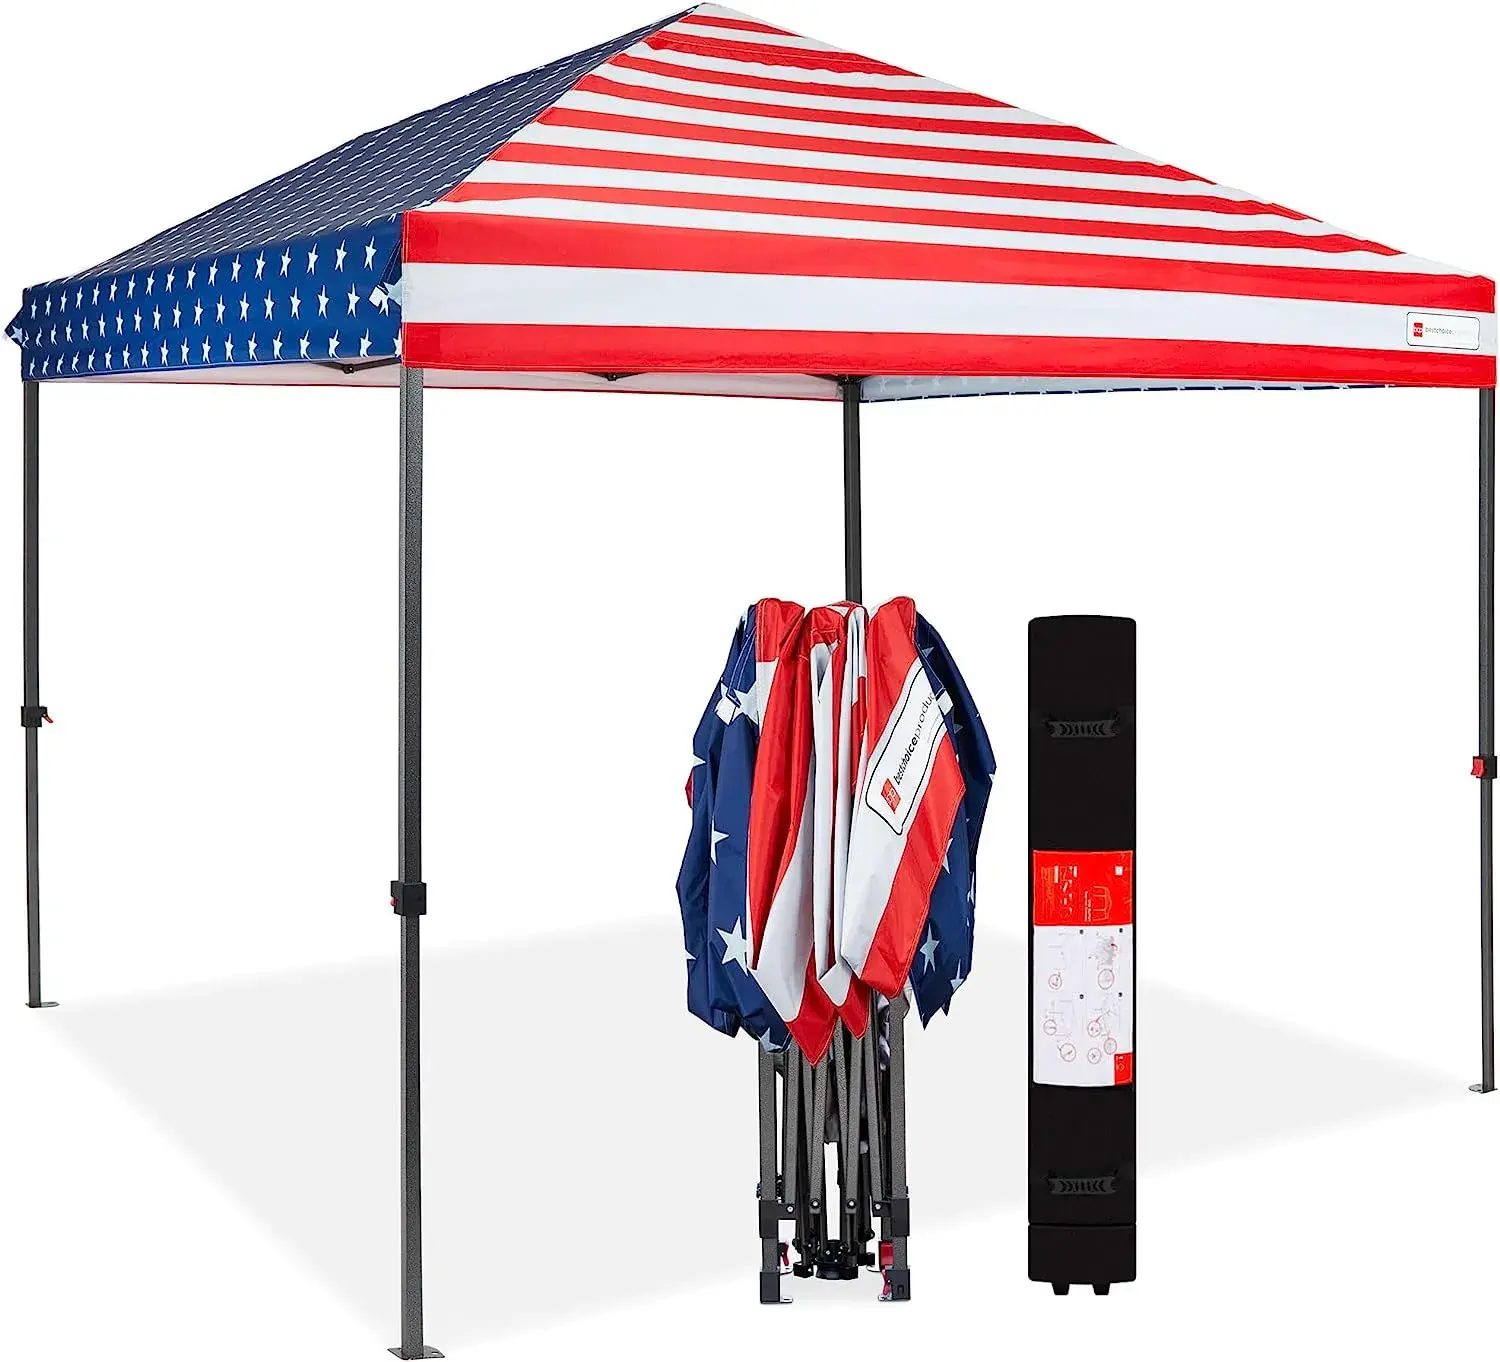 WITH AMERICAN FLAG PATTERN ONLY $19 TODAY!! 7